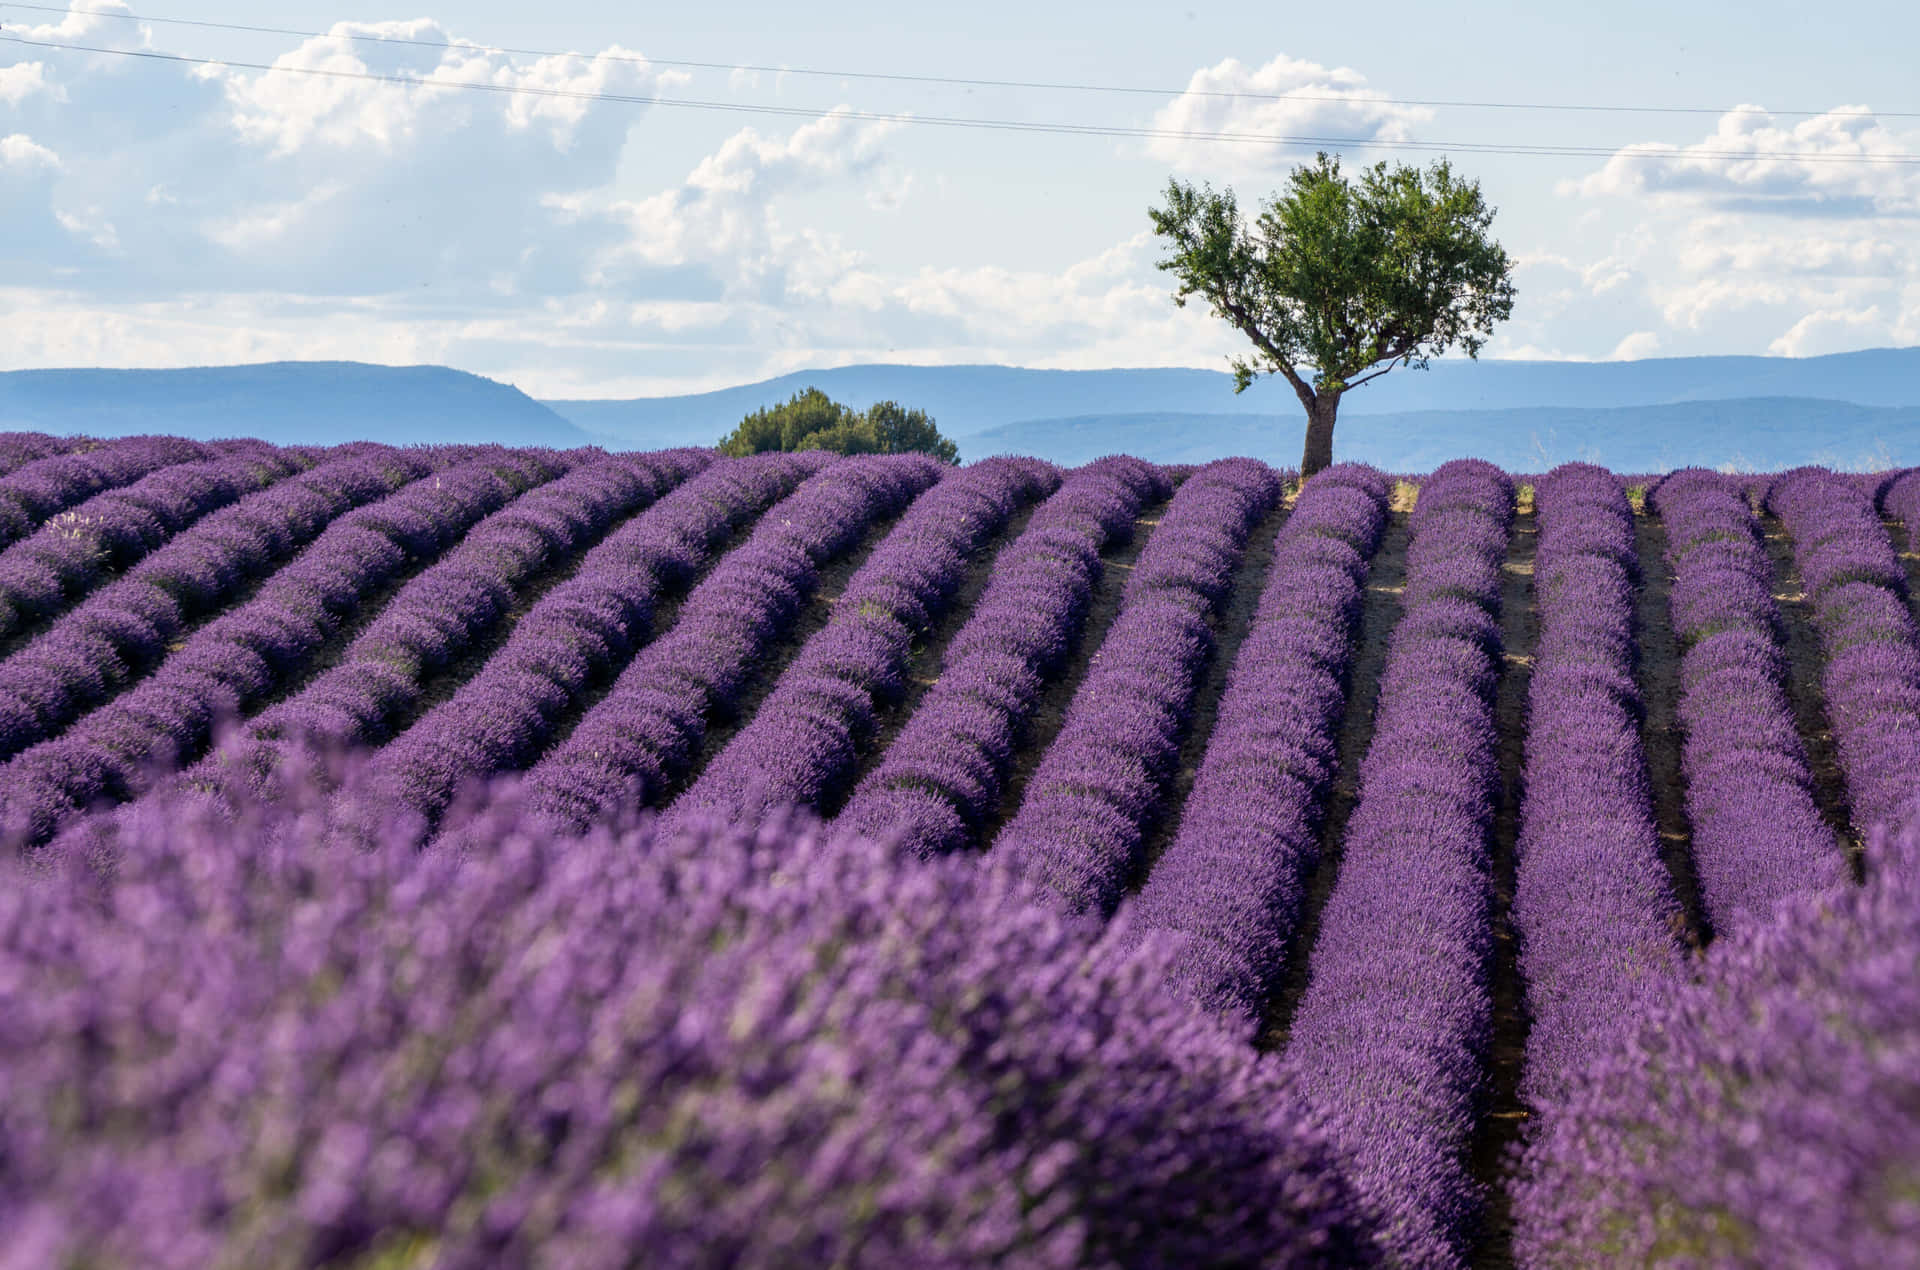 Relax and Enjoy the Lavender Field